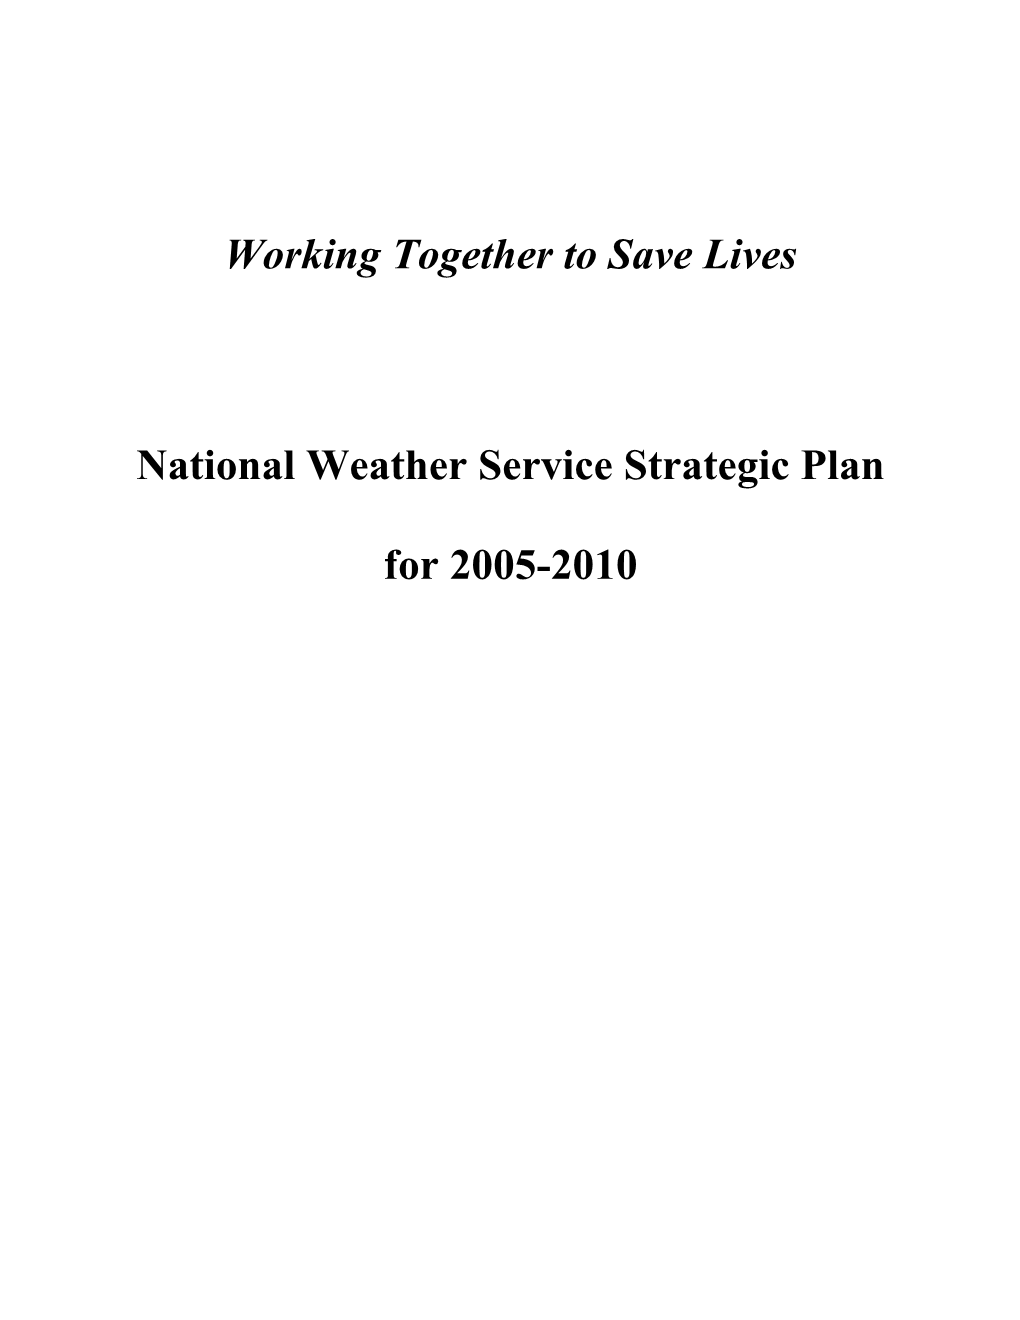 National Weather Service Strategic Plan for 2005-2010